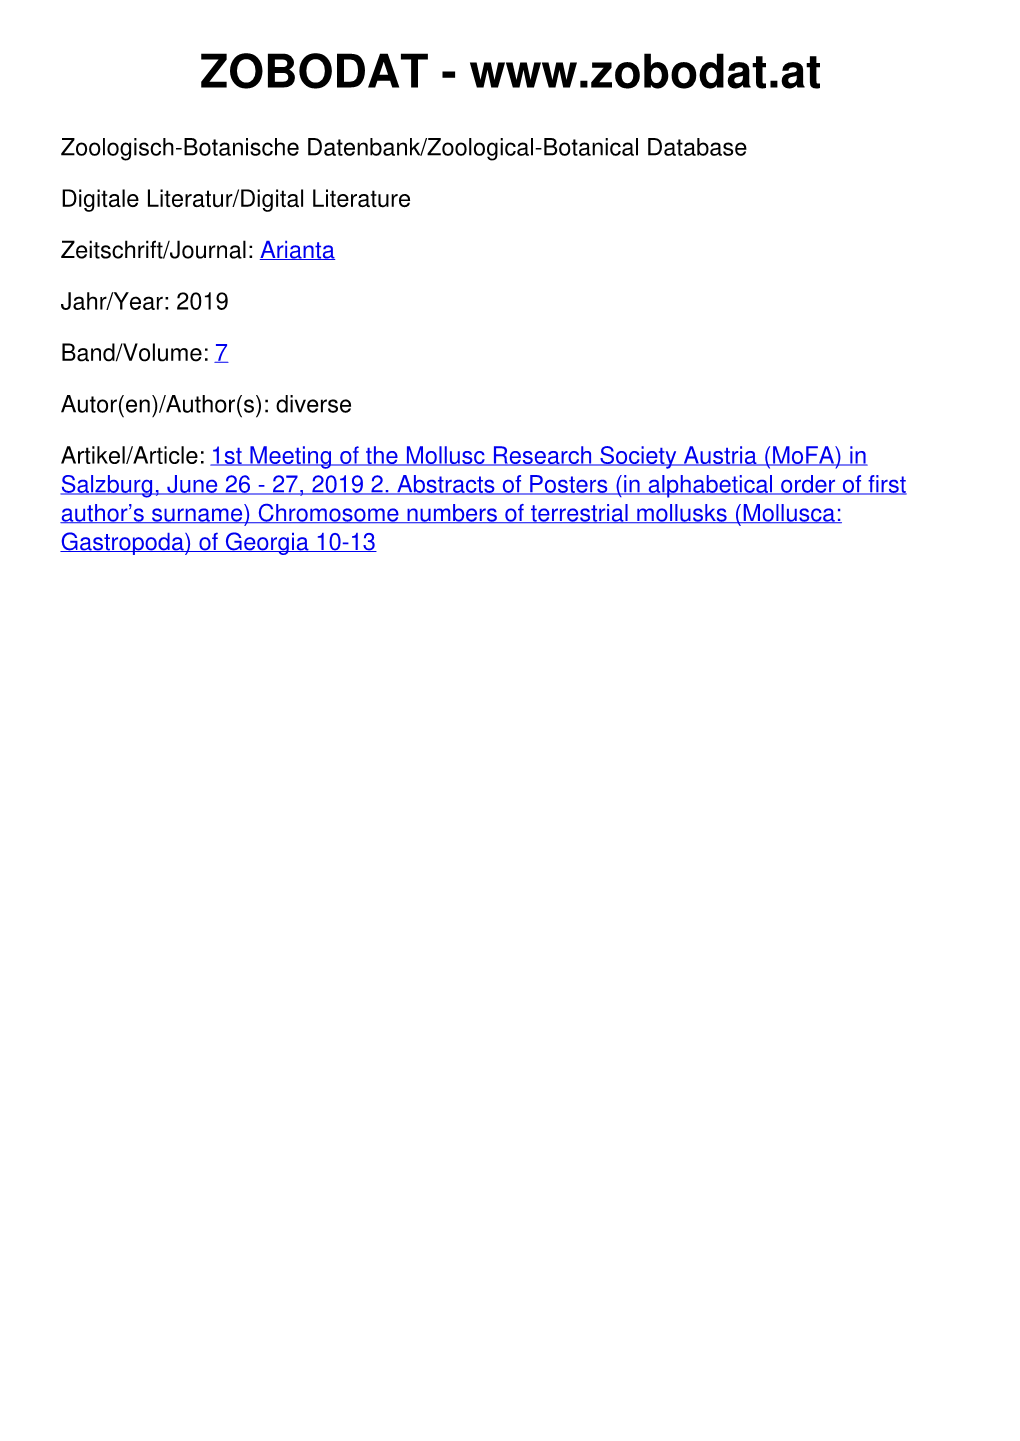 1St Meeting of the Mollusc Research Society Austria (Mofa) in Salzburg, June 26 - 27, 2019 2